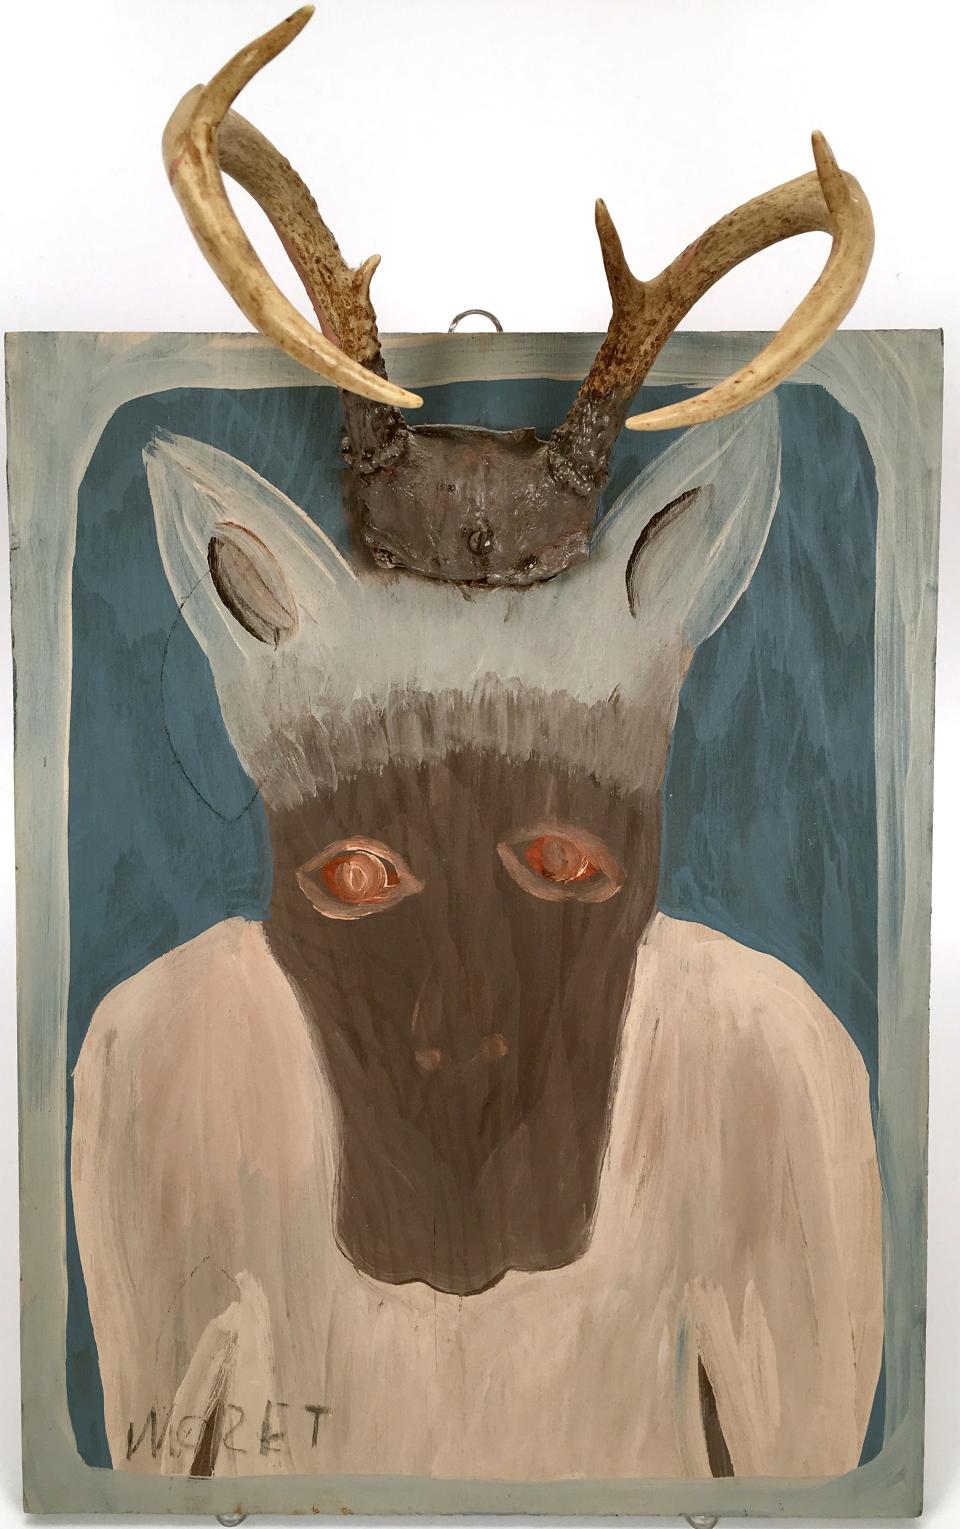 Mose Tolliver (American, about 1920–2006), Moose Head with Antlers, 1981, acrylic and antlers on plywood, Montgomery Museum of Fine Arts Association Purchase, 2015.9.2